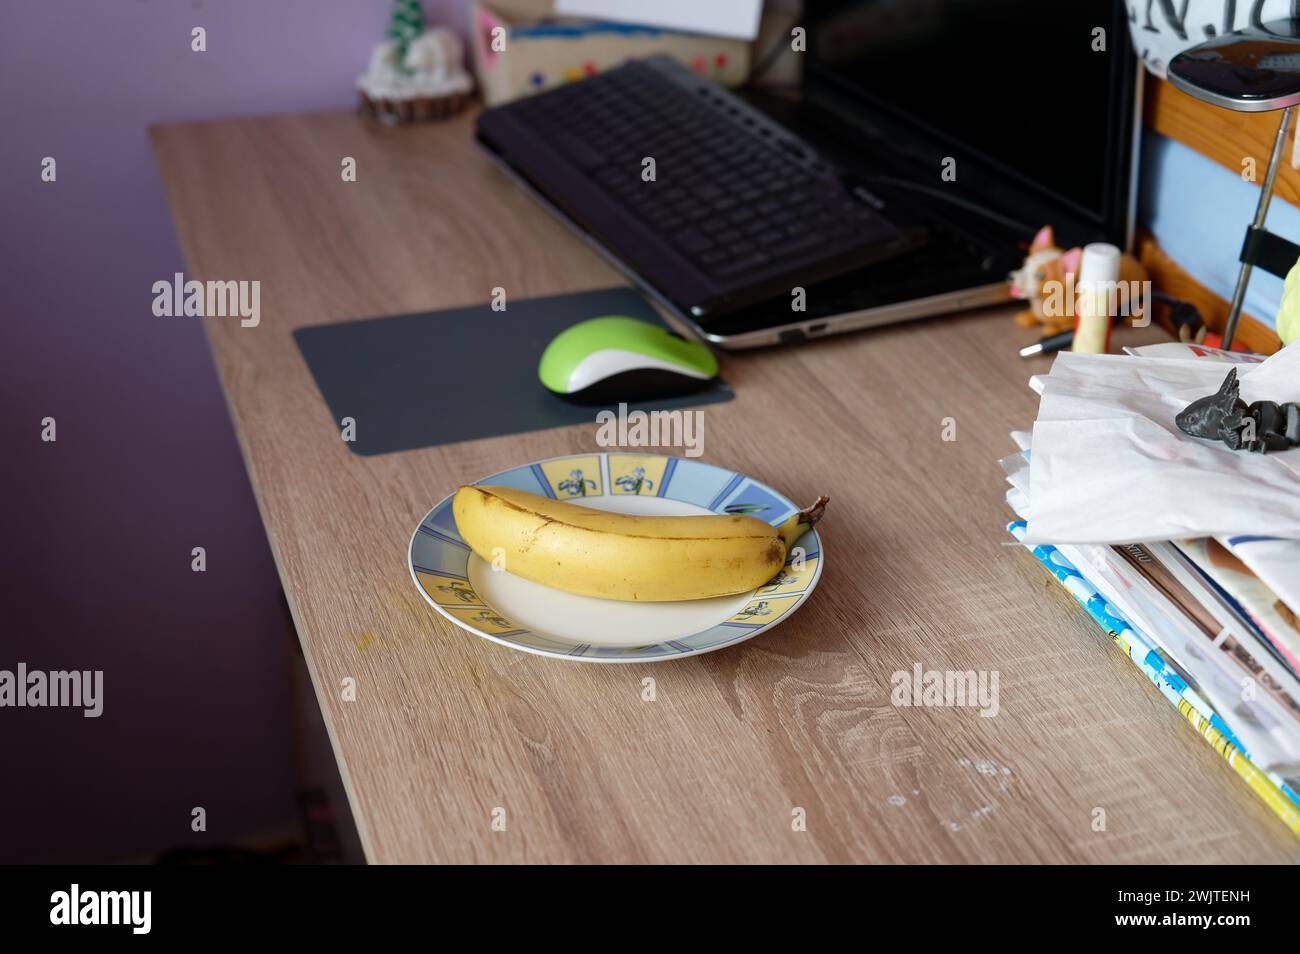 A beautiful fresh banana on a work table at home or in the office with a computer or laptop - notebook. Stock Photo